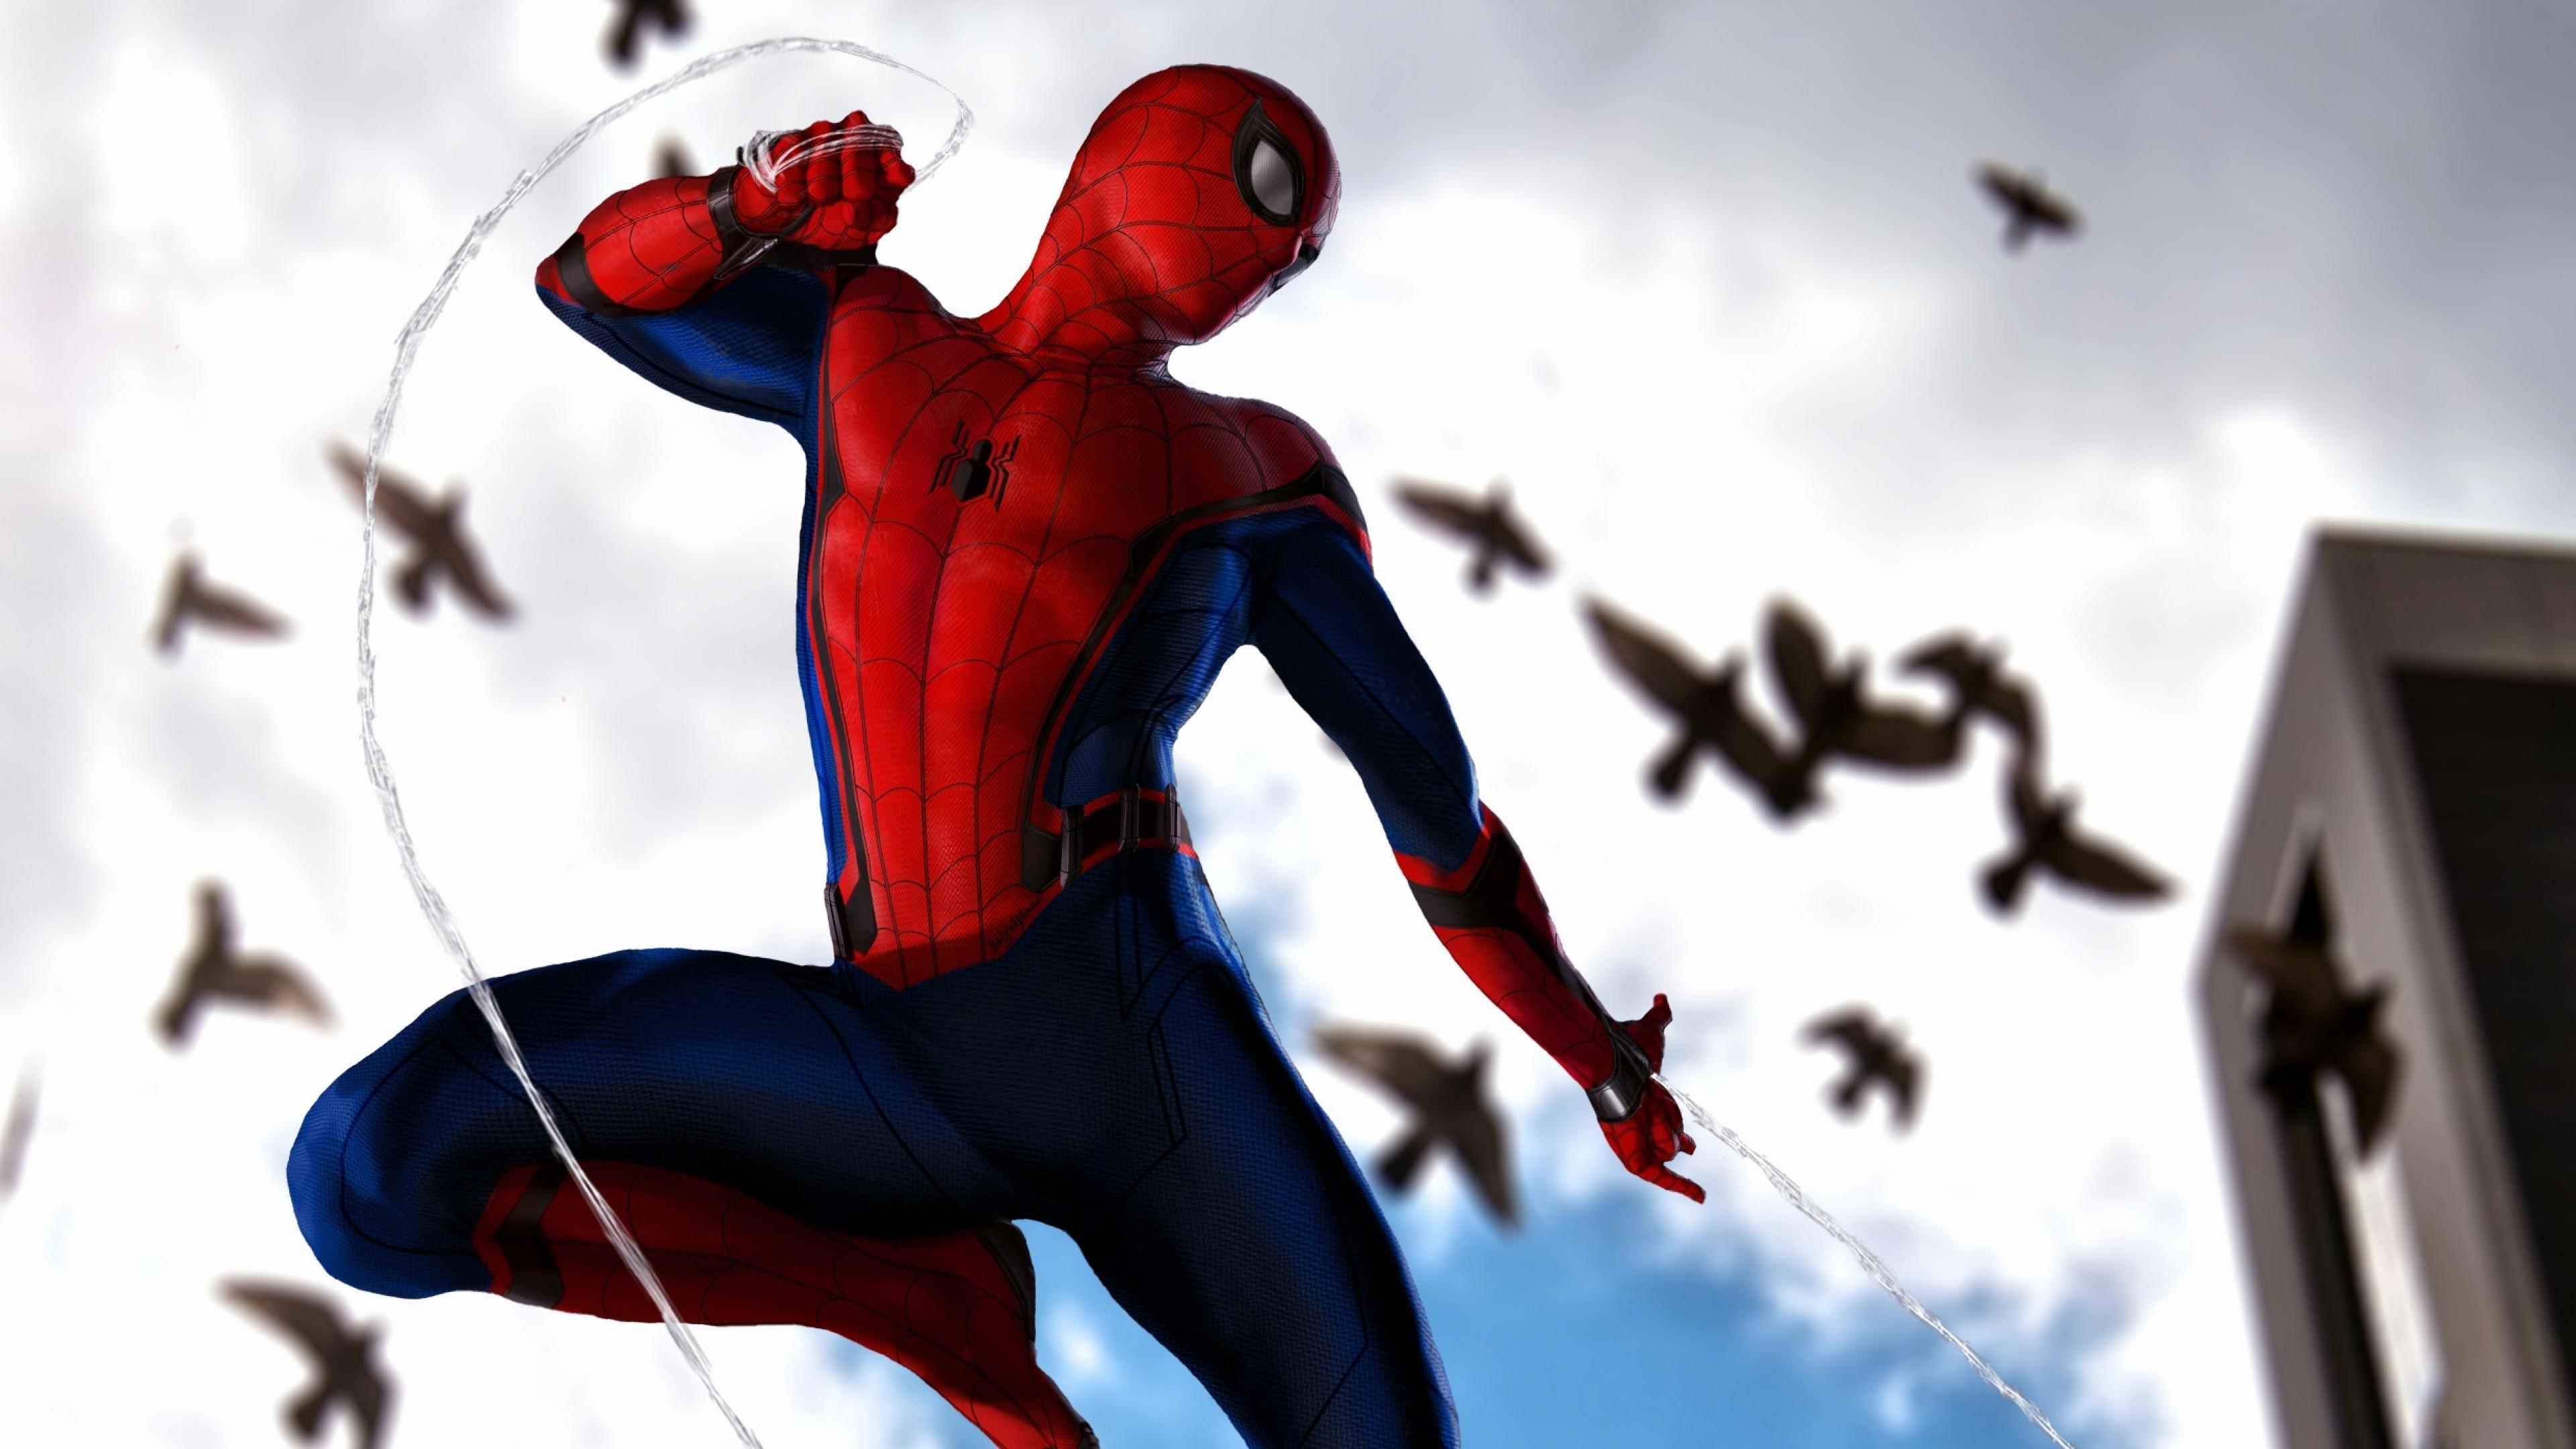 Download 3840x2160 Spider Man: Homecoming, Tom Holland Wallpaper